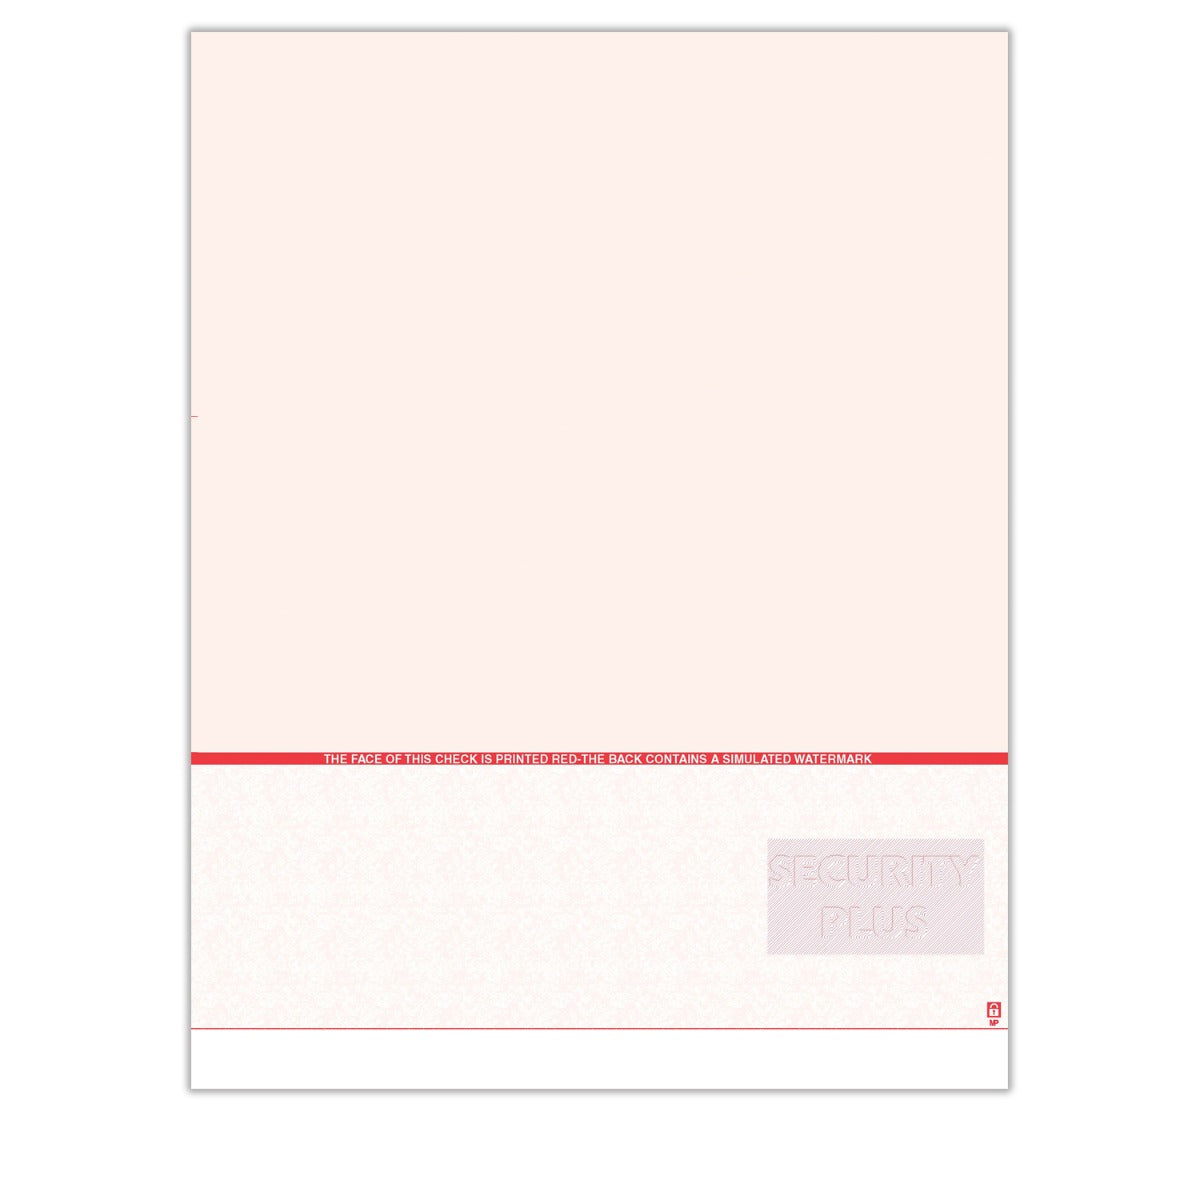 TROY Security Plus Check Paper, Red, Check Bottom, Ream